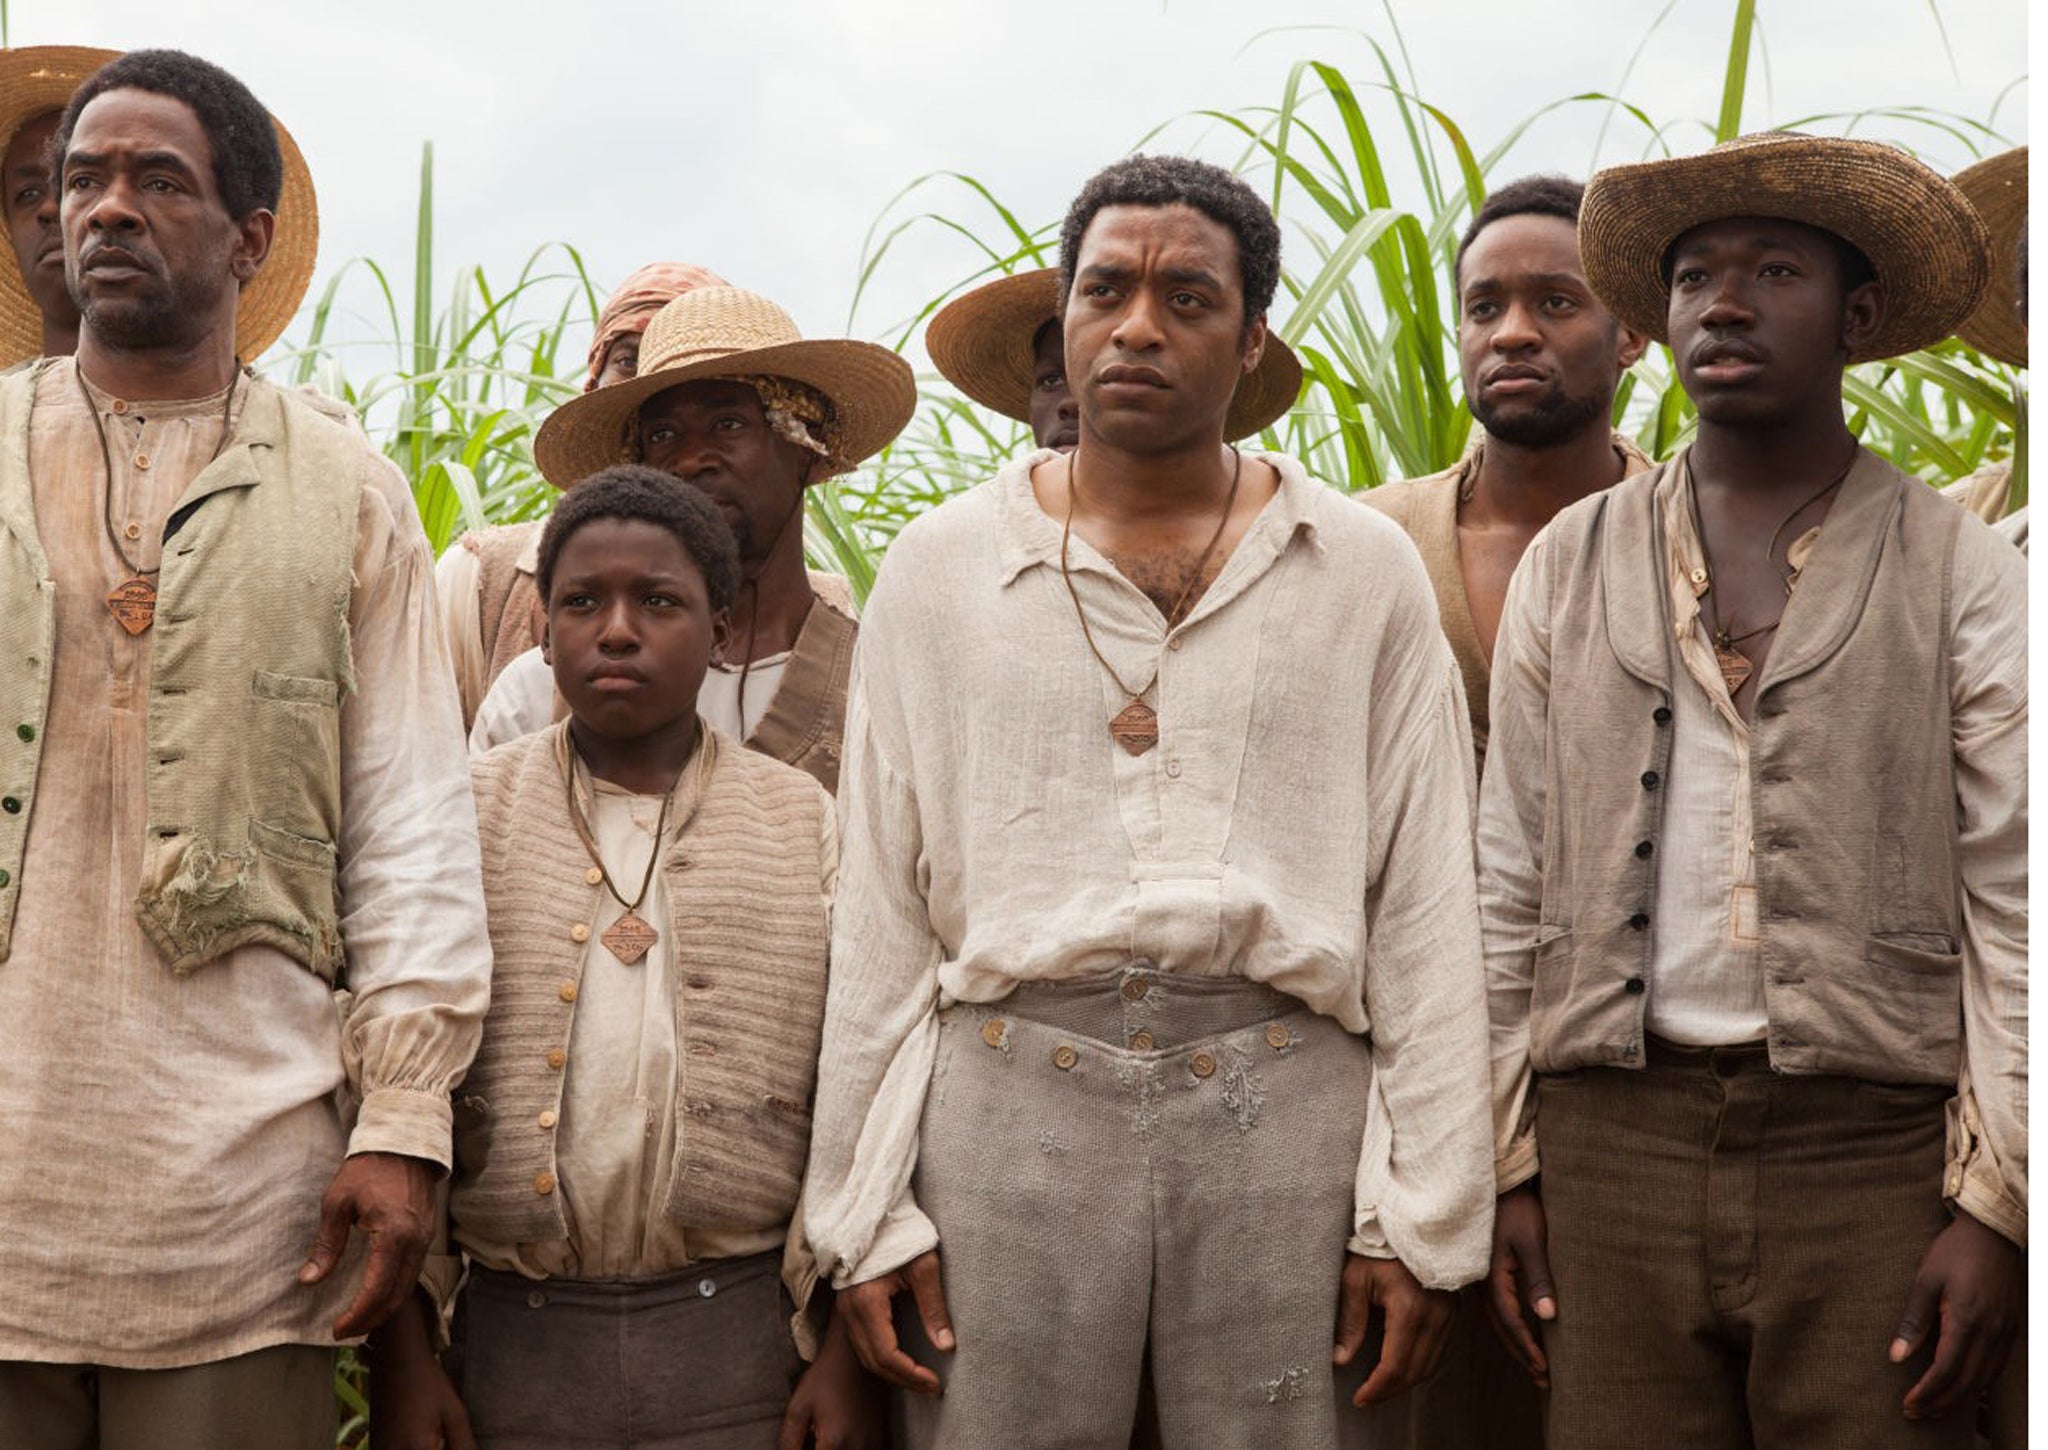 Chiwetel Ejiofor has been nominated for an Oscar for his role as Solomon Northup in 12 Years a Slave